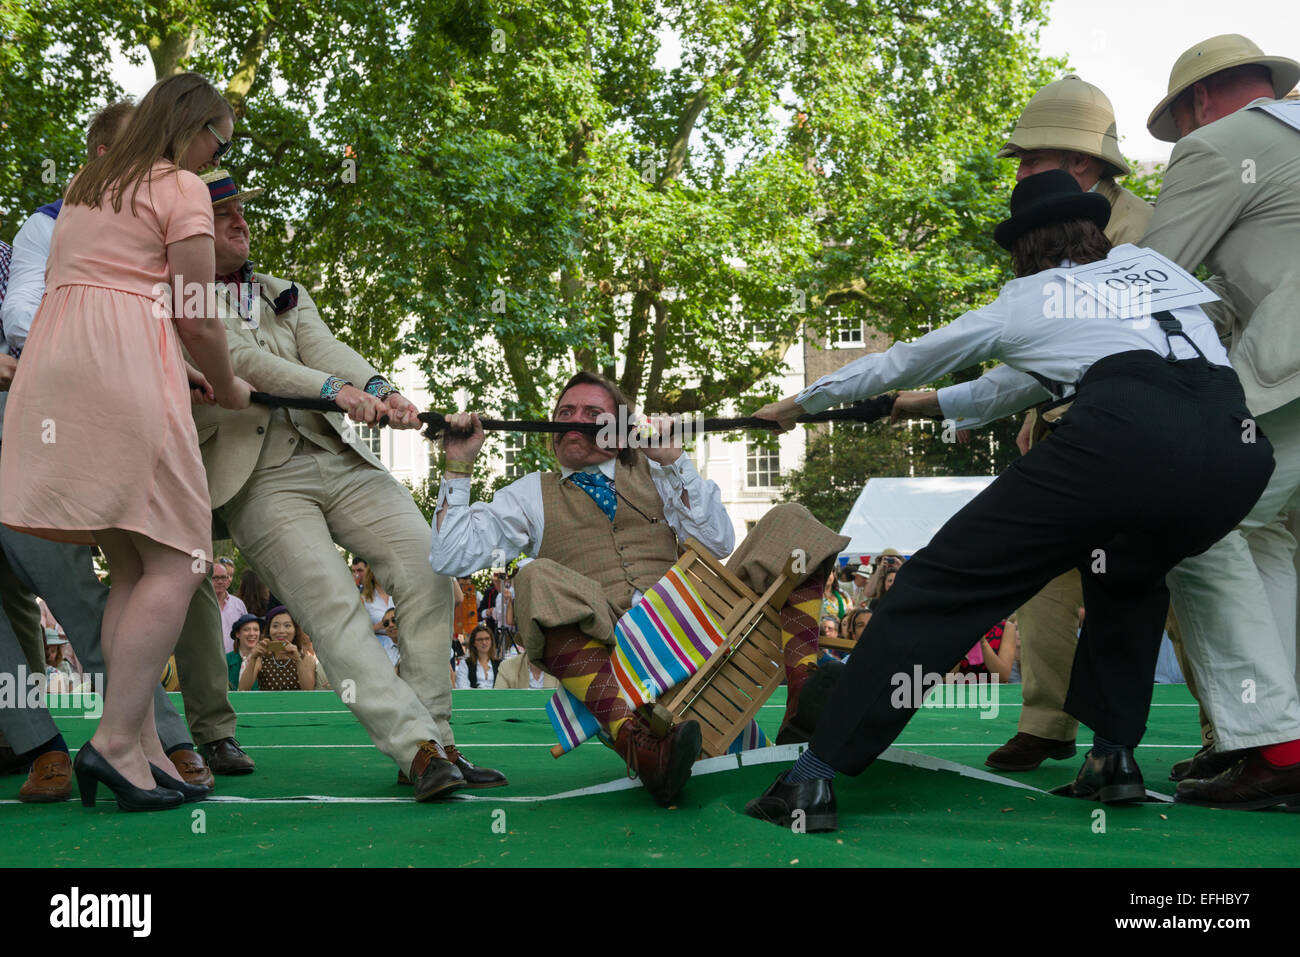 The 10 Anniversary of the Chap Olympiad. A sartorial gathering of chaps and chapesses in Bloomsbury London. Various Chap sports are held at a picnic in the square. This event is the Tug of Hair - a moustache tug of war, London, England Stock Photo